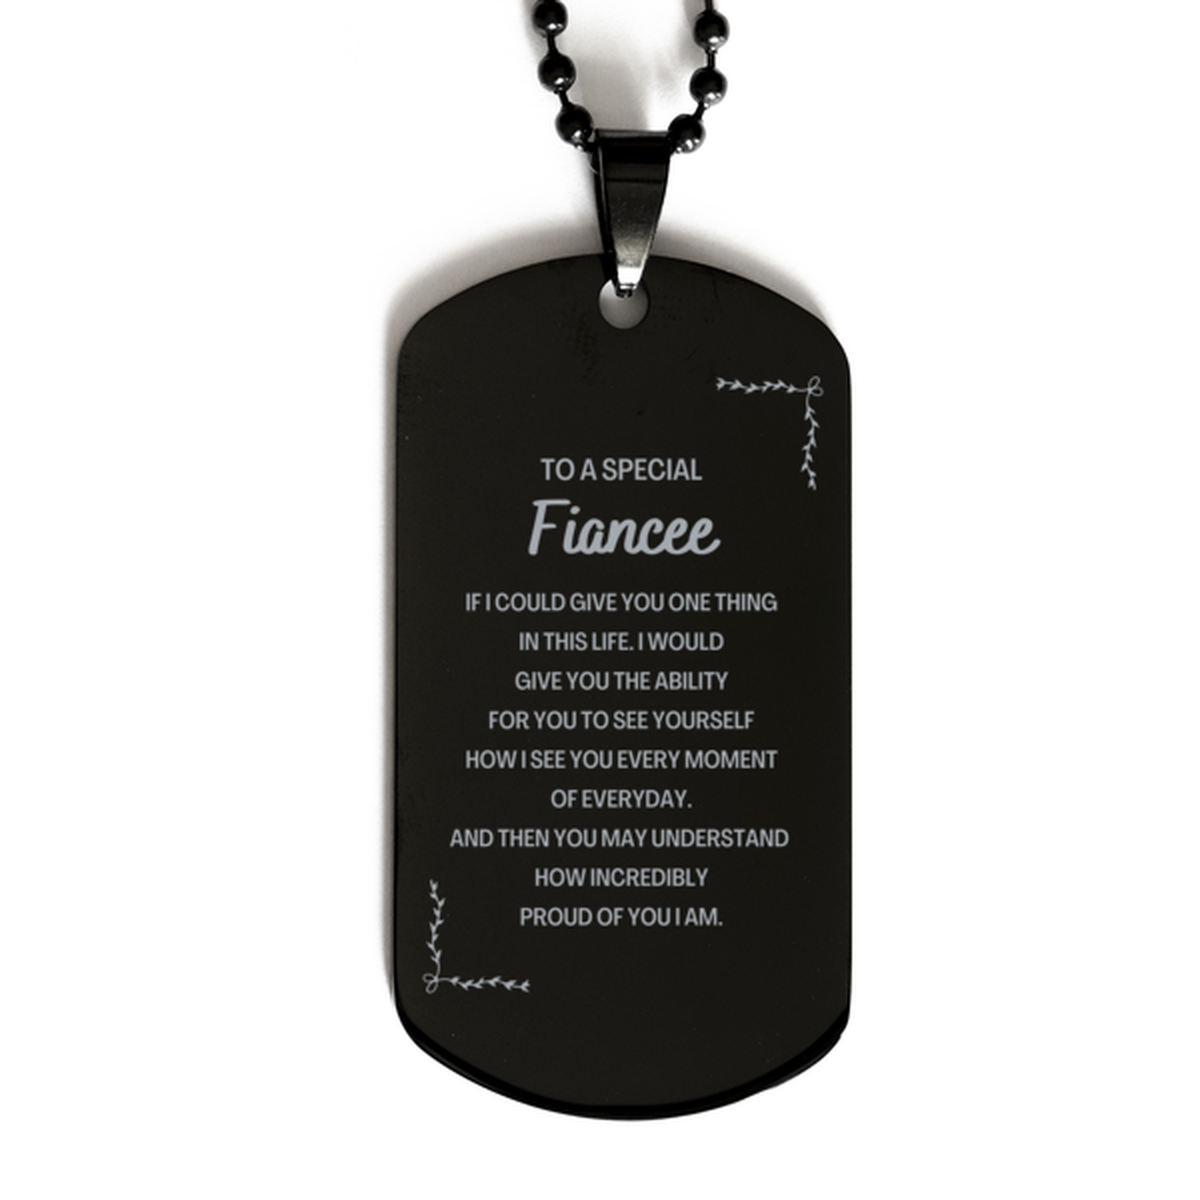 To My Fiancee Black Dog Tag, Gifts For Fiancee Engraved, Inspirational Gifts for Christmas Birthday, Epic Gifts for Fiancee To A Special Fiancee how incredibly proud of you I am